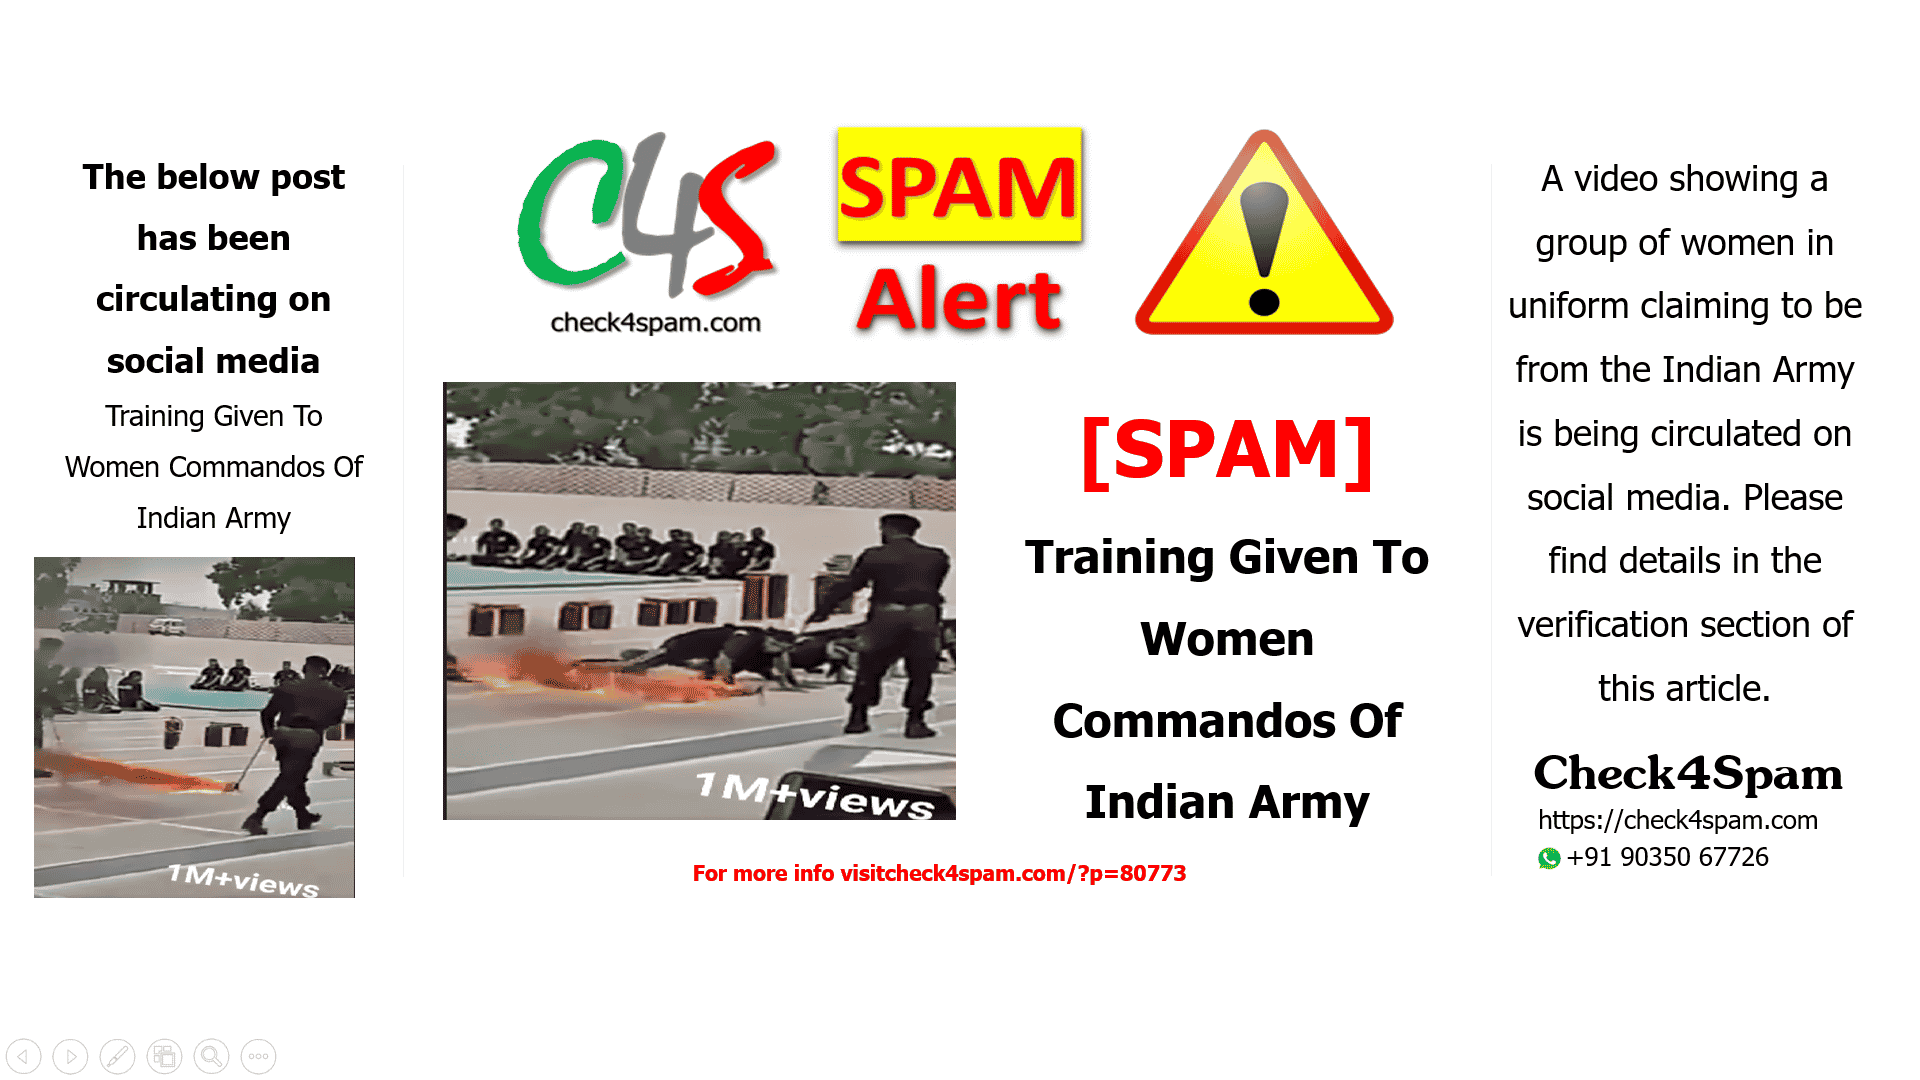 Training Given To Women Commandos Of Indian Army